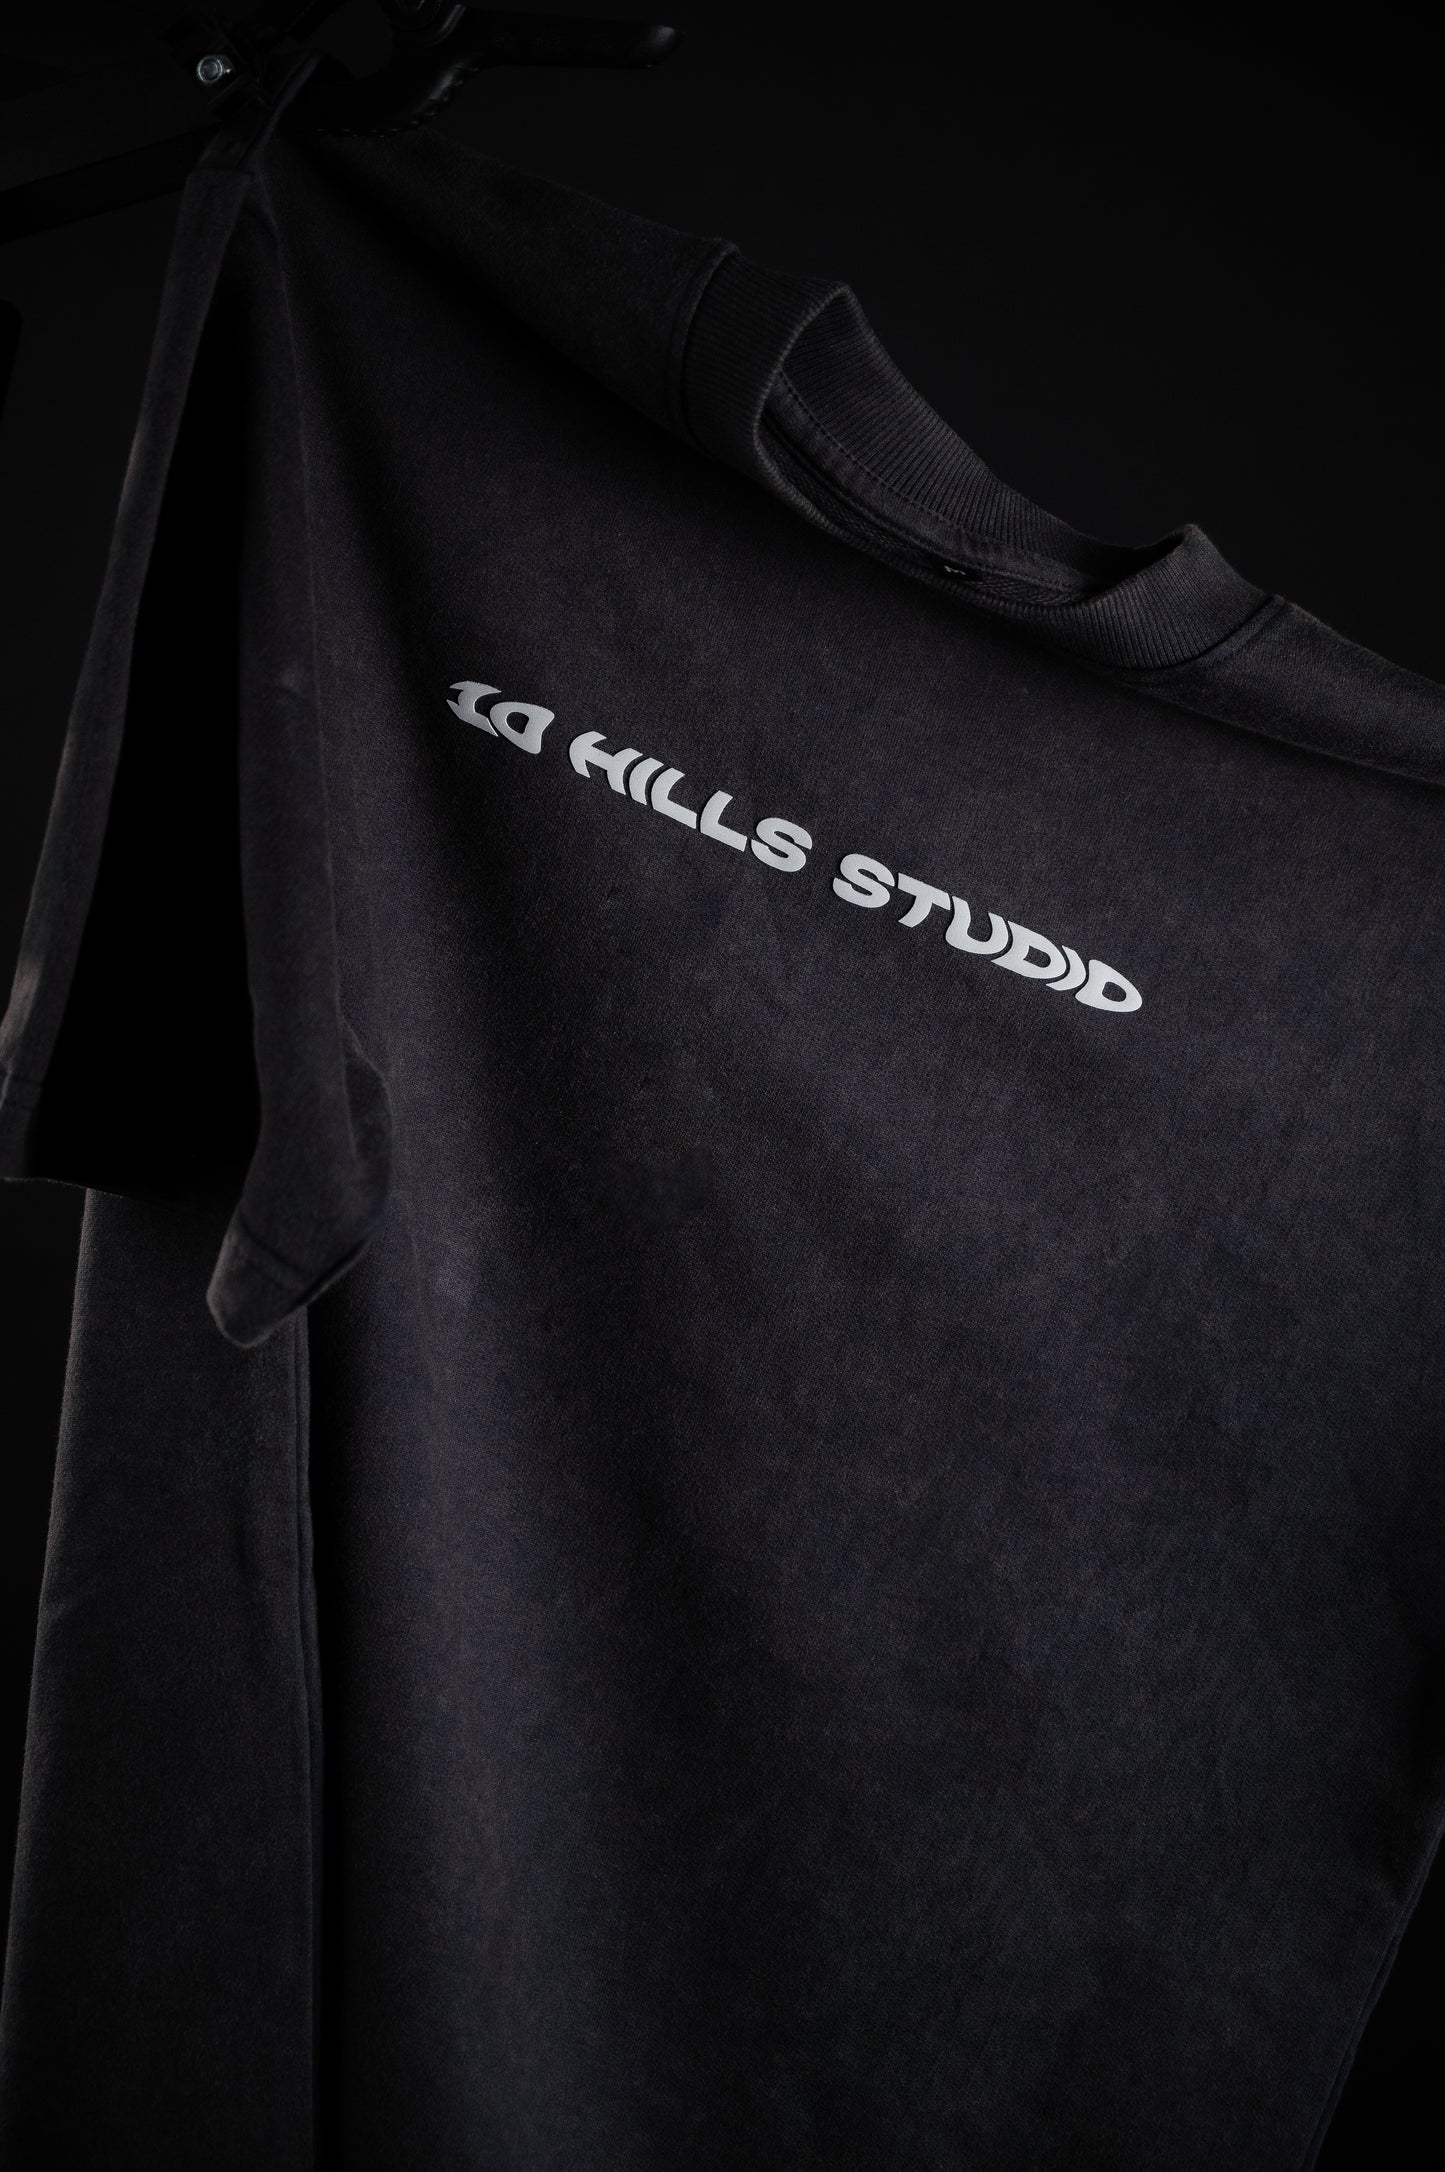 Front view of 10 Hills Studio Vintage Black Logo Tee hanging in a dark contrast style photography